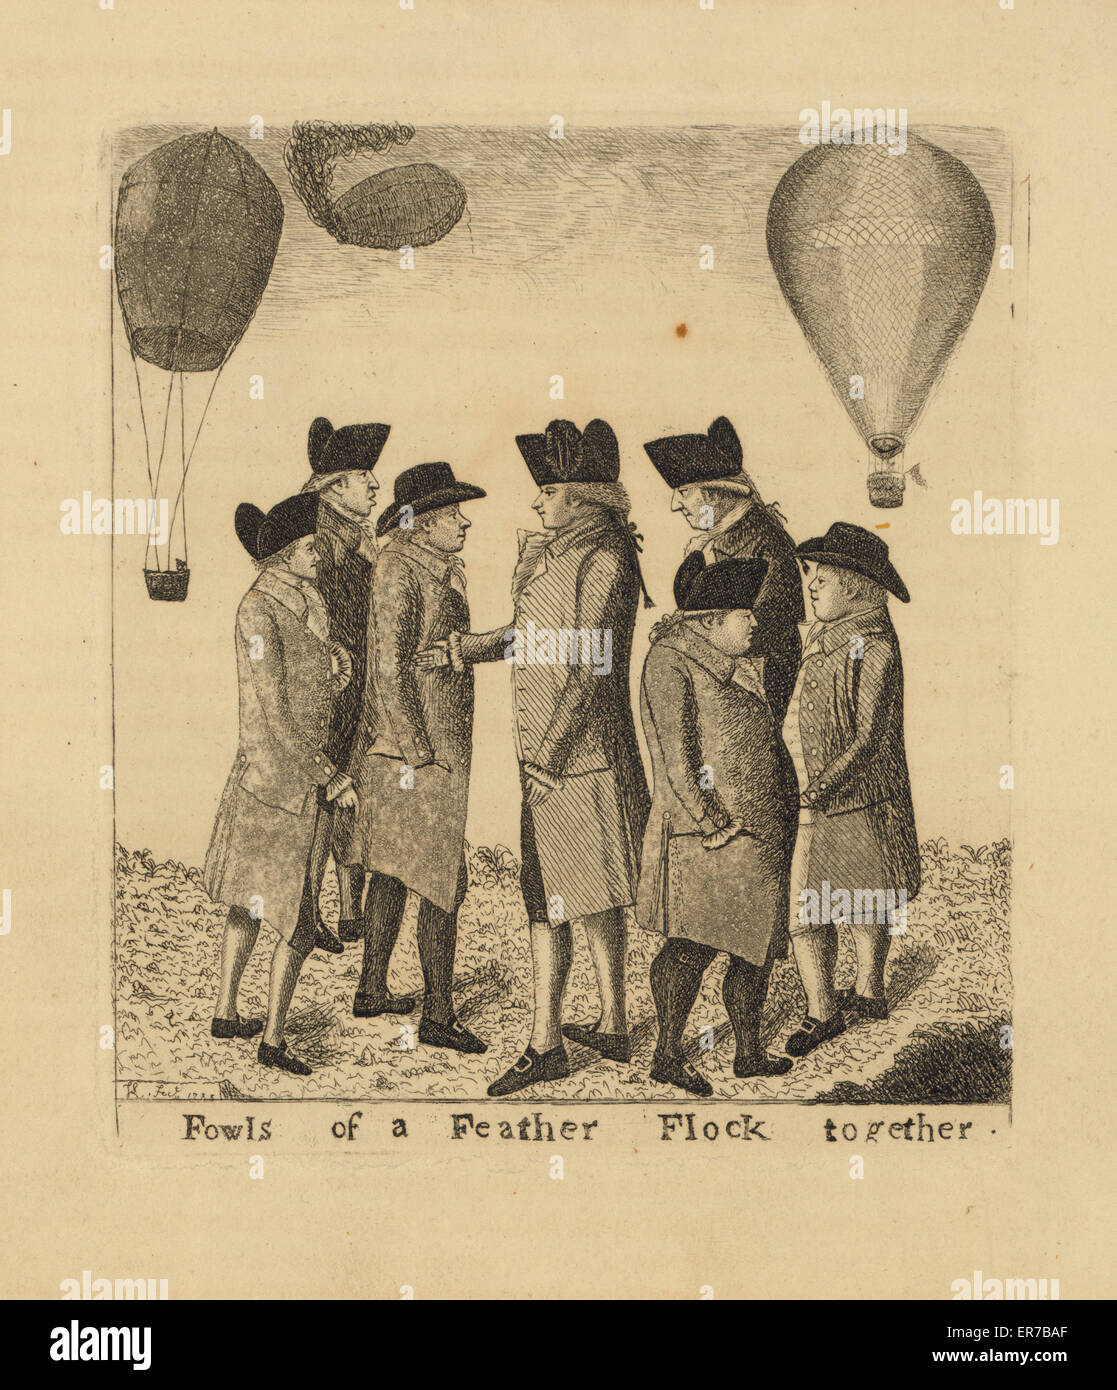 Fowls of a feather flock together. Scottish cartoon shows a group of men conversing as balloons sail overhead. Possibly Scottish balloonist James Tytler and Italian balloonist Vincent Lunardi. Date 1785. Stock Photo